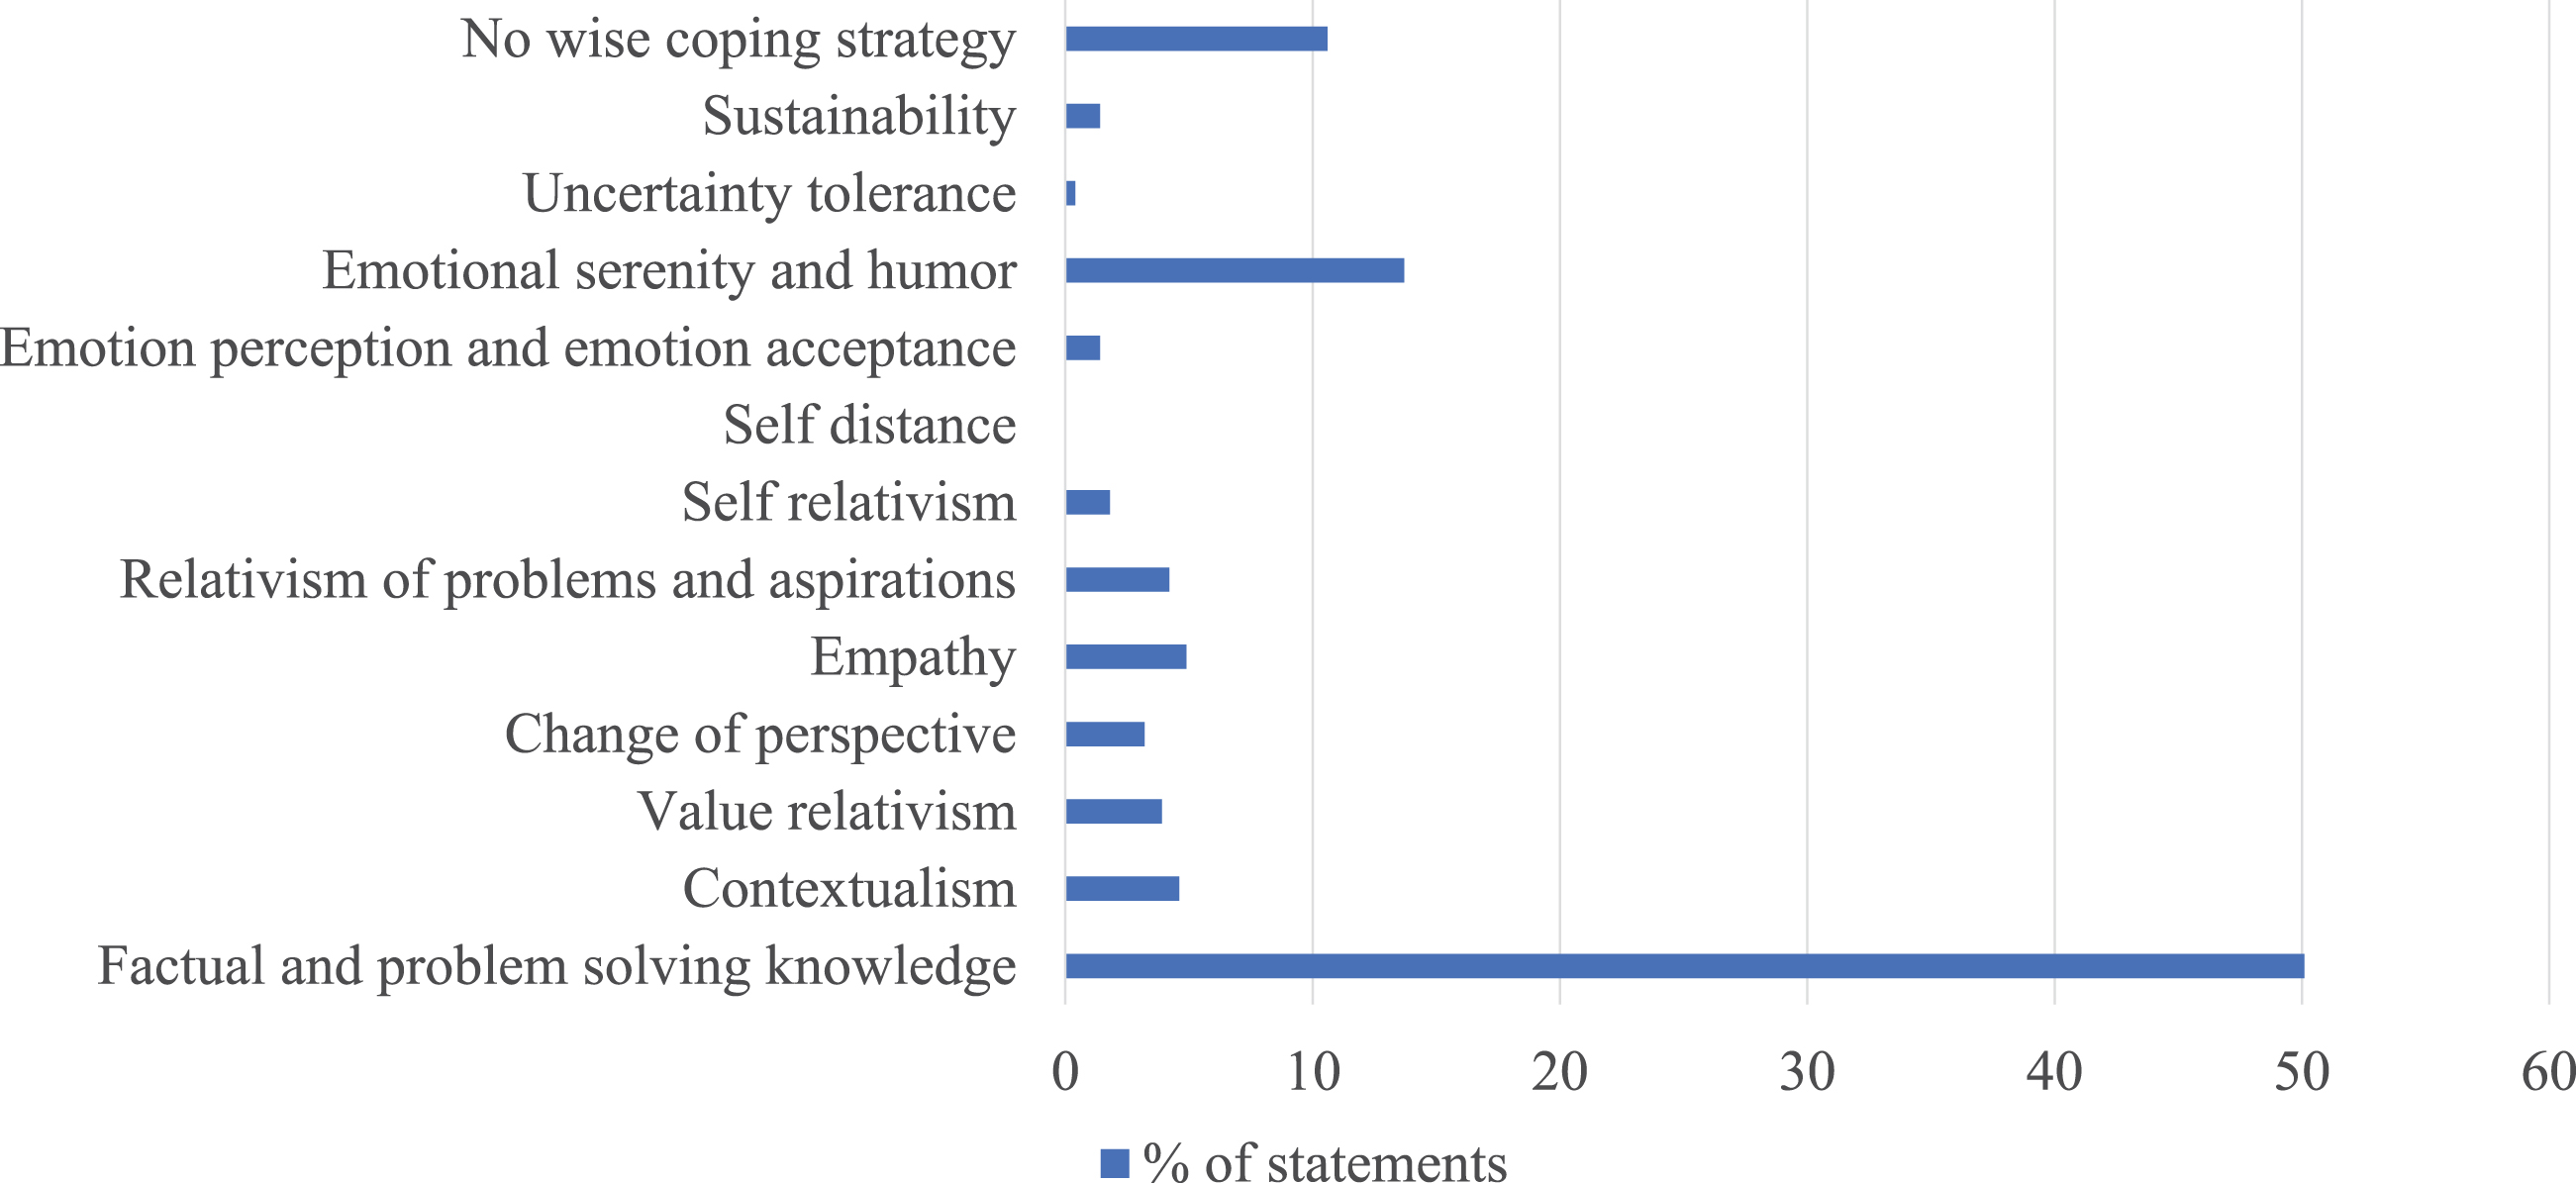 Distribution of work-related coping strategies (N = 284 text segments) according to categories of 12 wisdom capacities and the additional category “no wise coping strategy”.